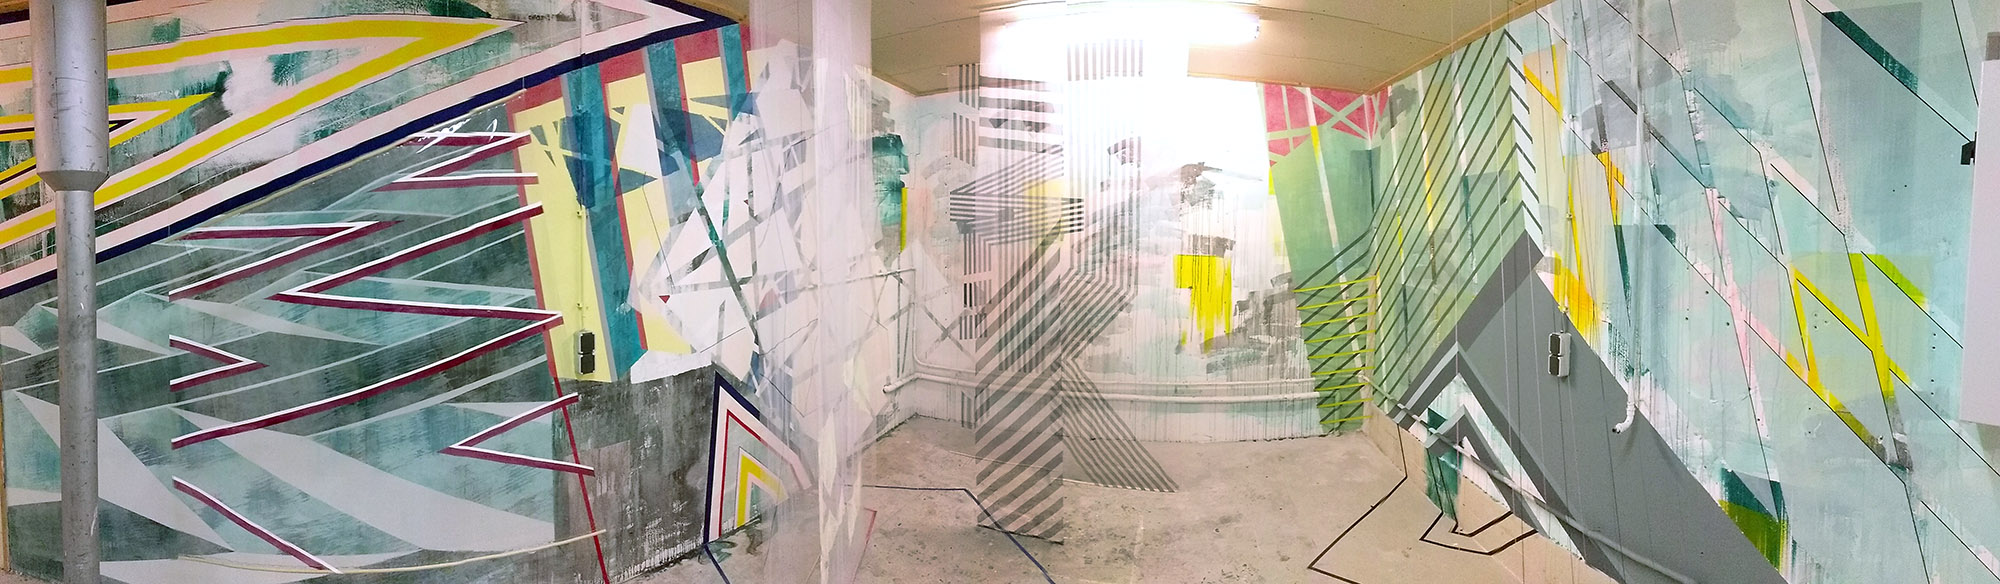 Experimental wall painting and installation